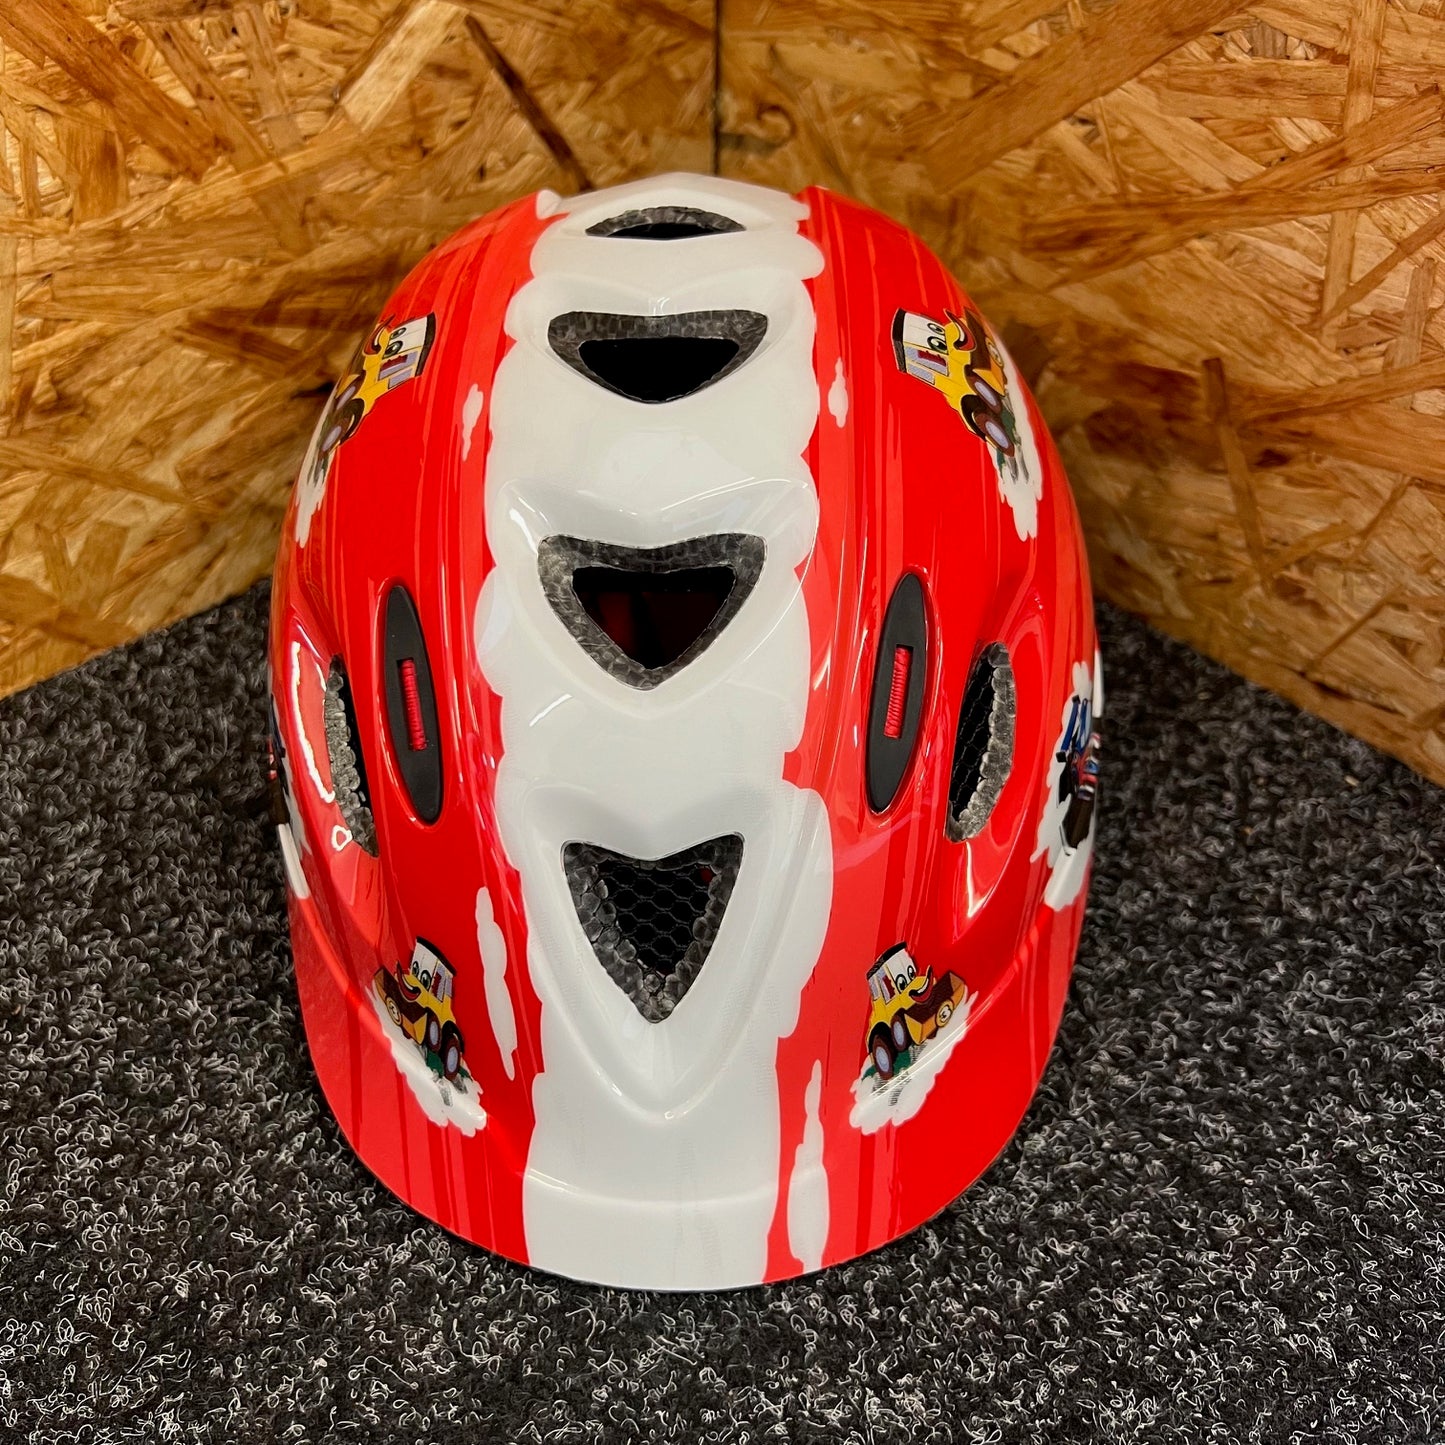 Apex Childrens Cycle Helmet, Red with Vehicles - Small - 46-52cm